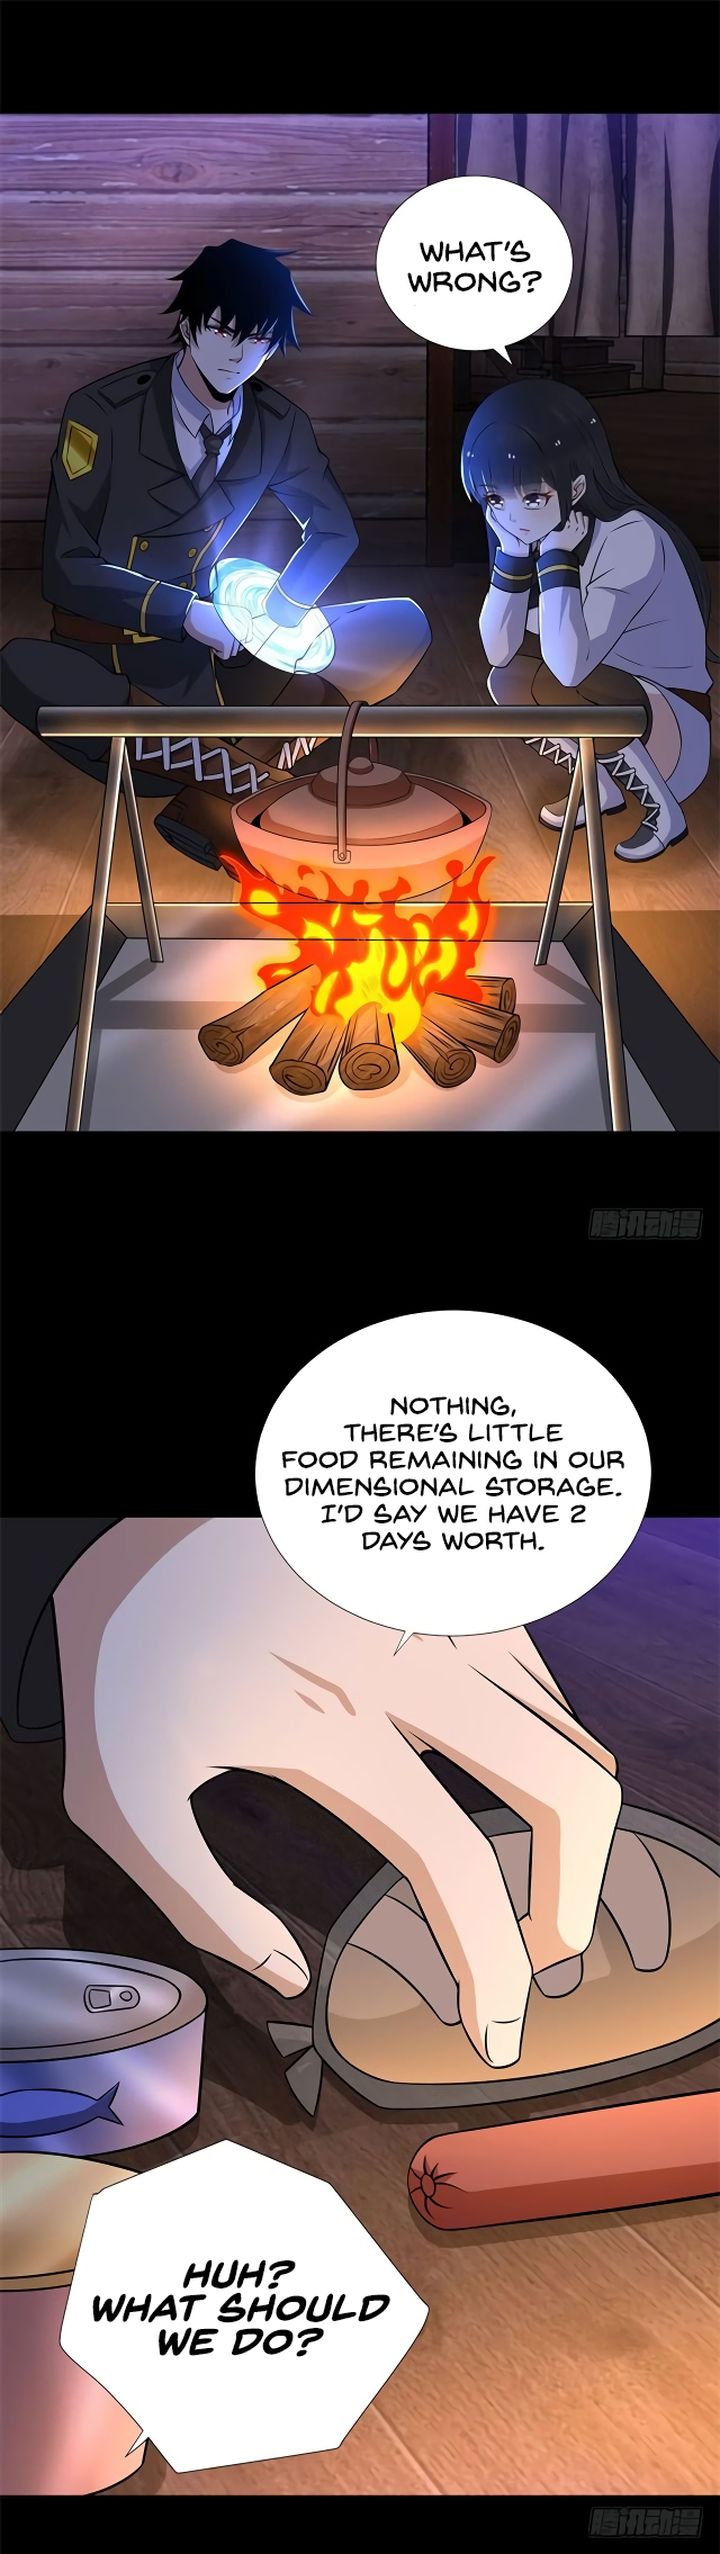 King Of Apocalypse Chapter 187 Page 4